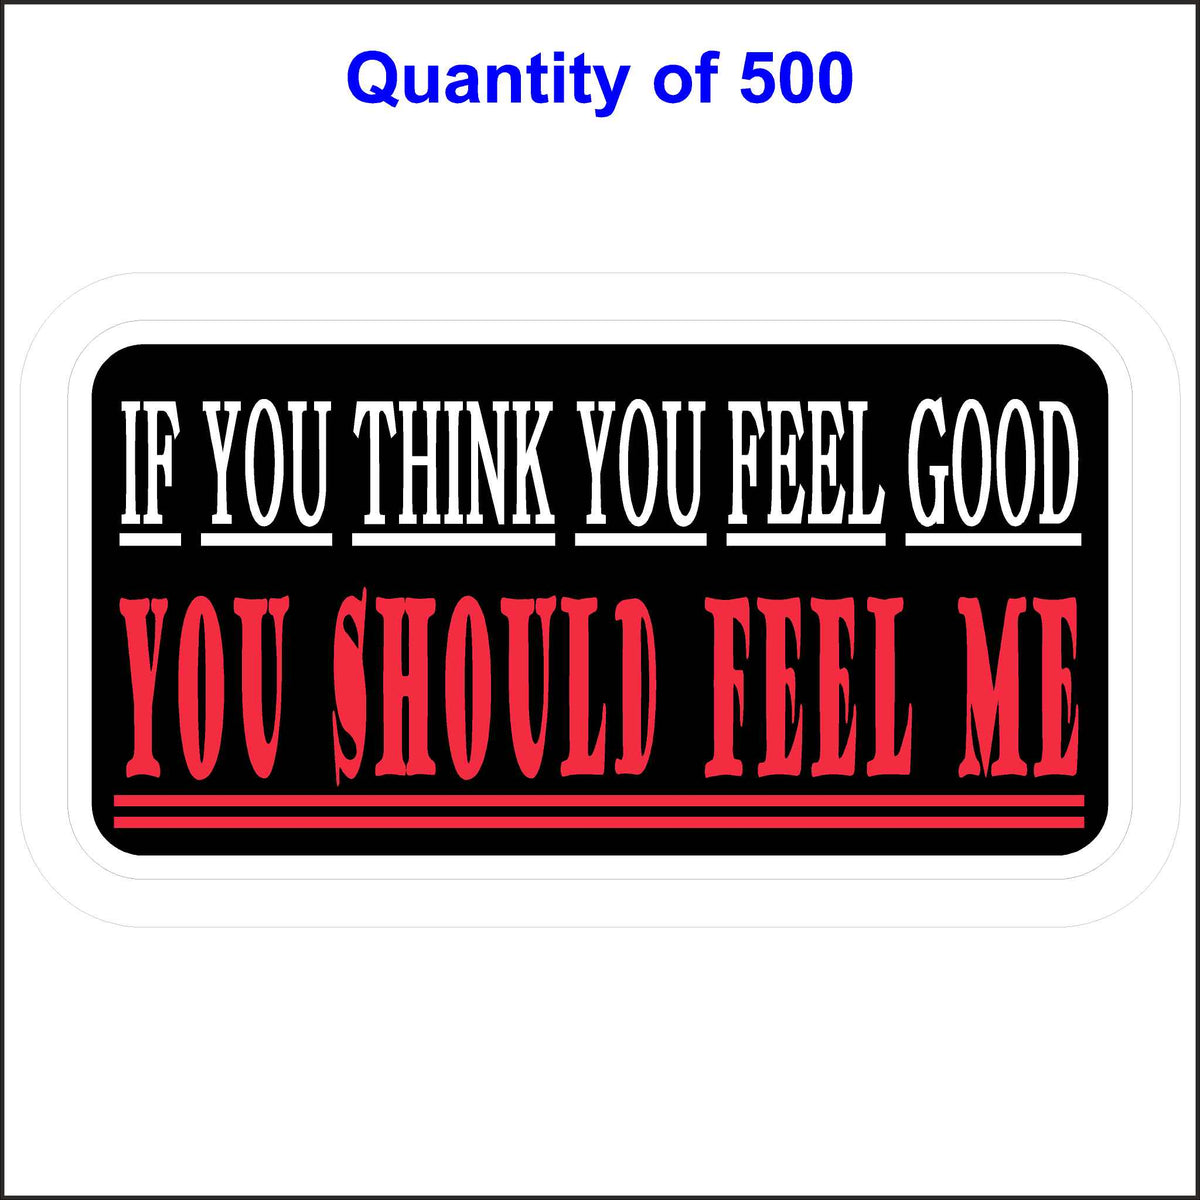 500 Quantity of This If You Think You Feel Good You Should Feel Me Sticker.